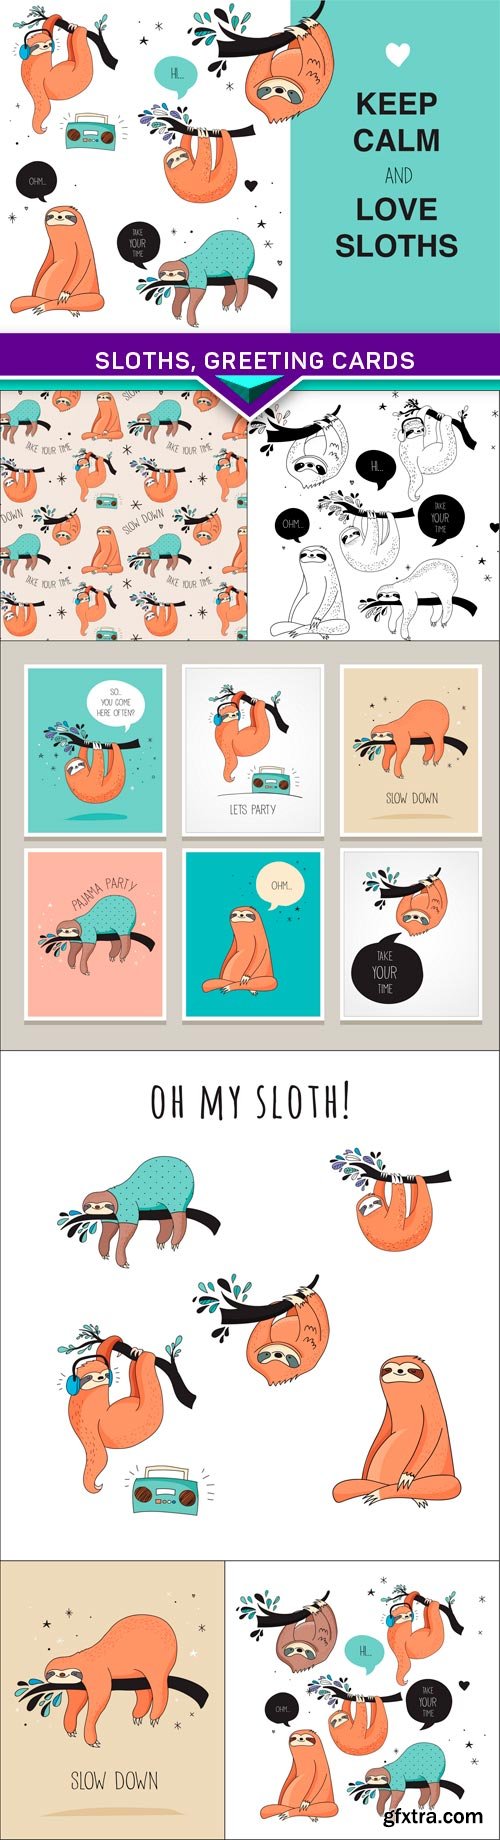 Sloths, greeting cards 7x EPS